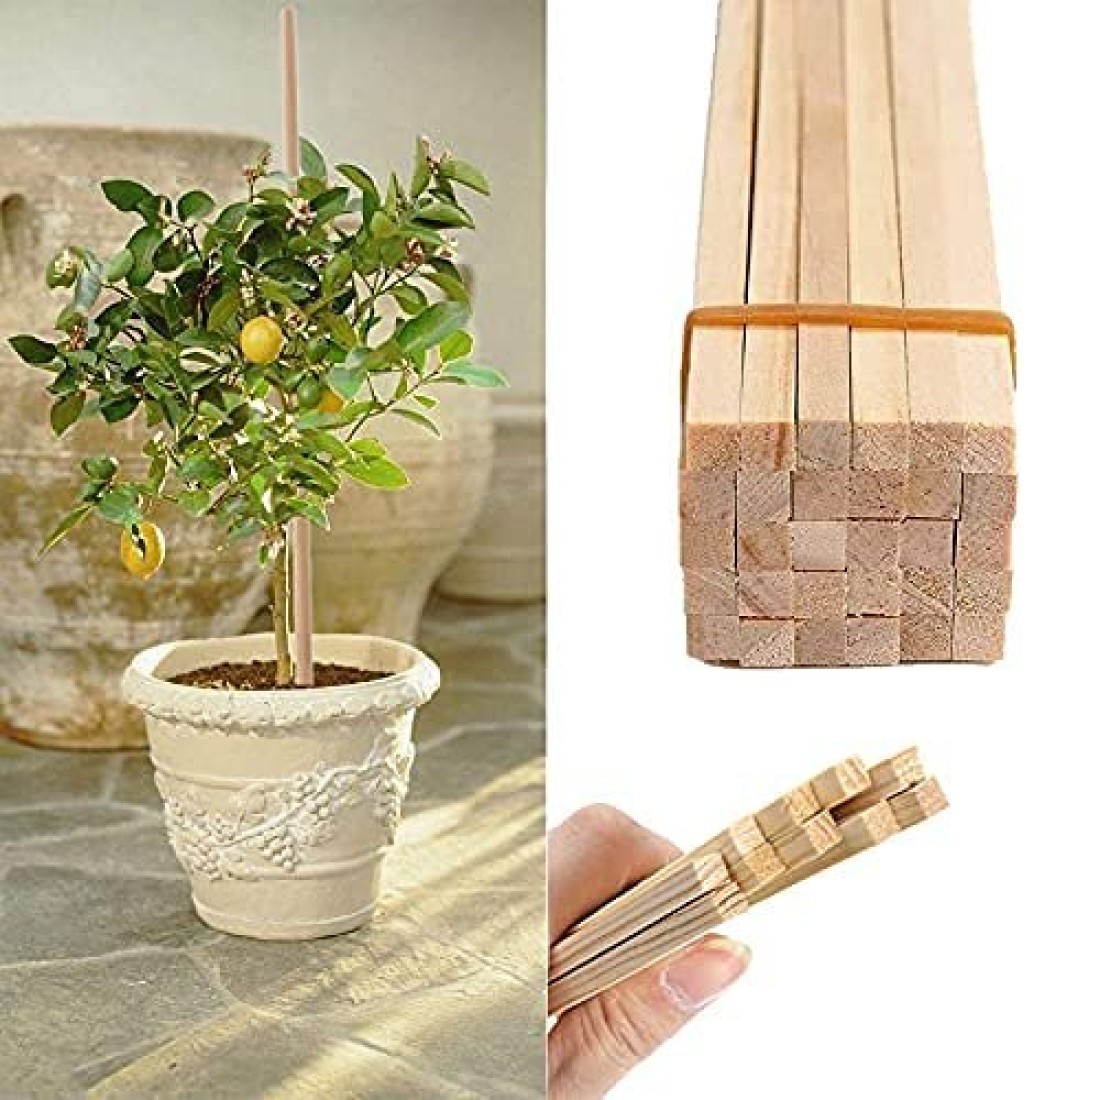 Wooden Support Sticks for Plants Climbing Support for Home Indoor & Outdoor Plants-Size 3 feet, 20 Pcs 2